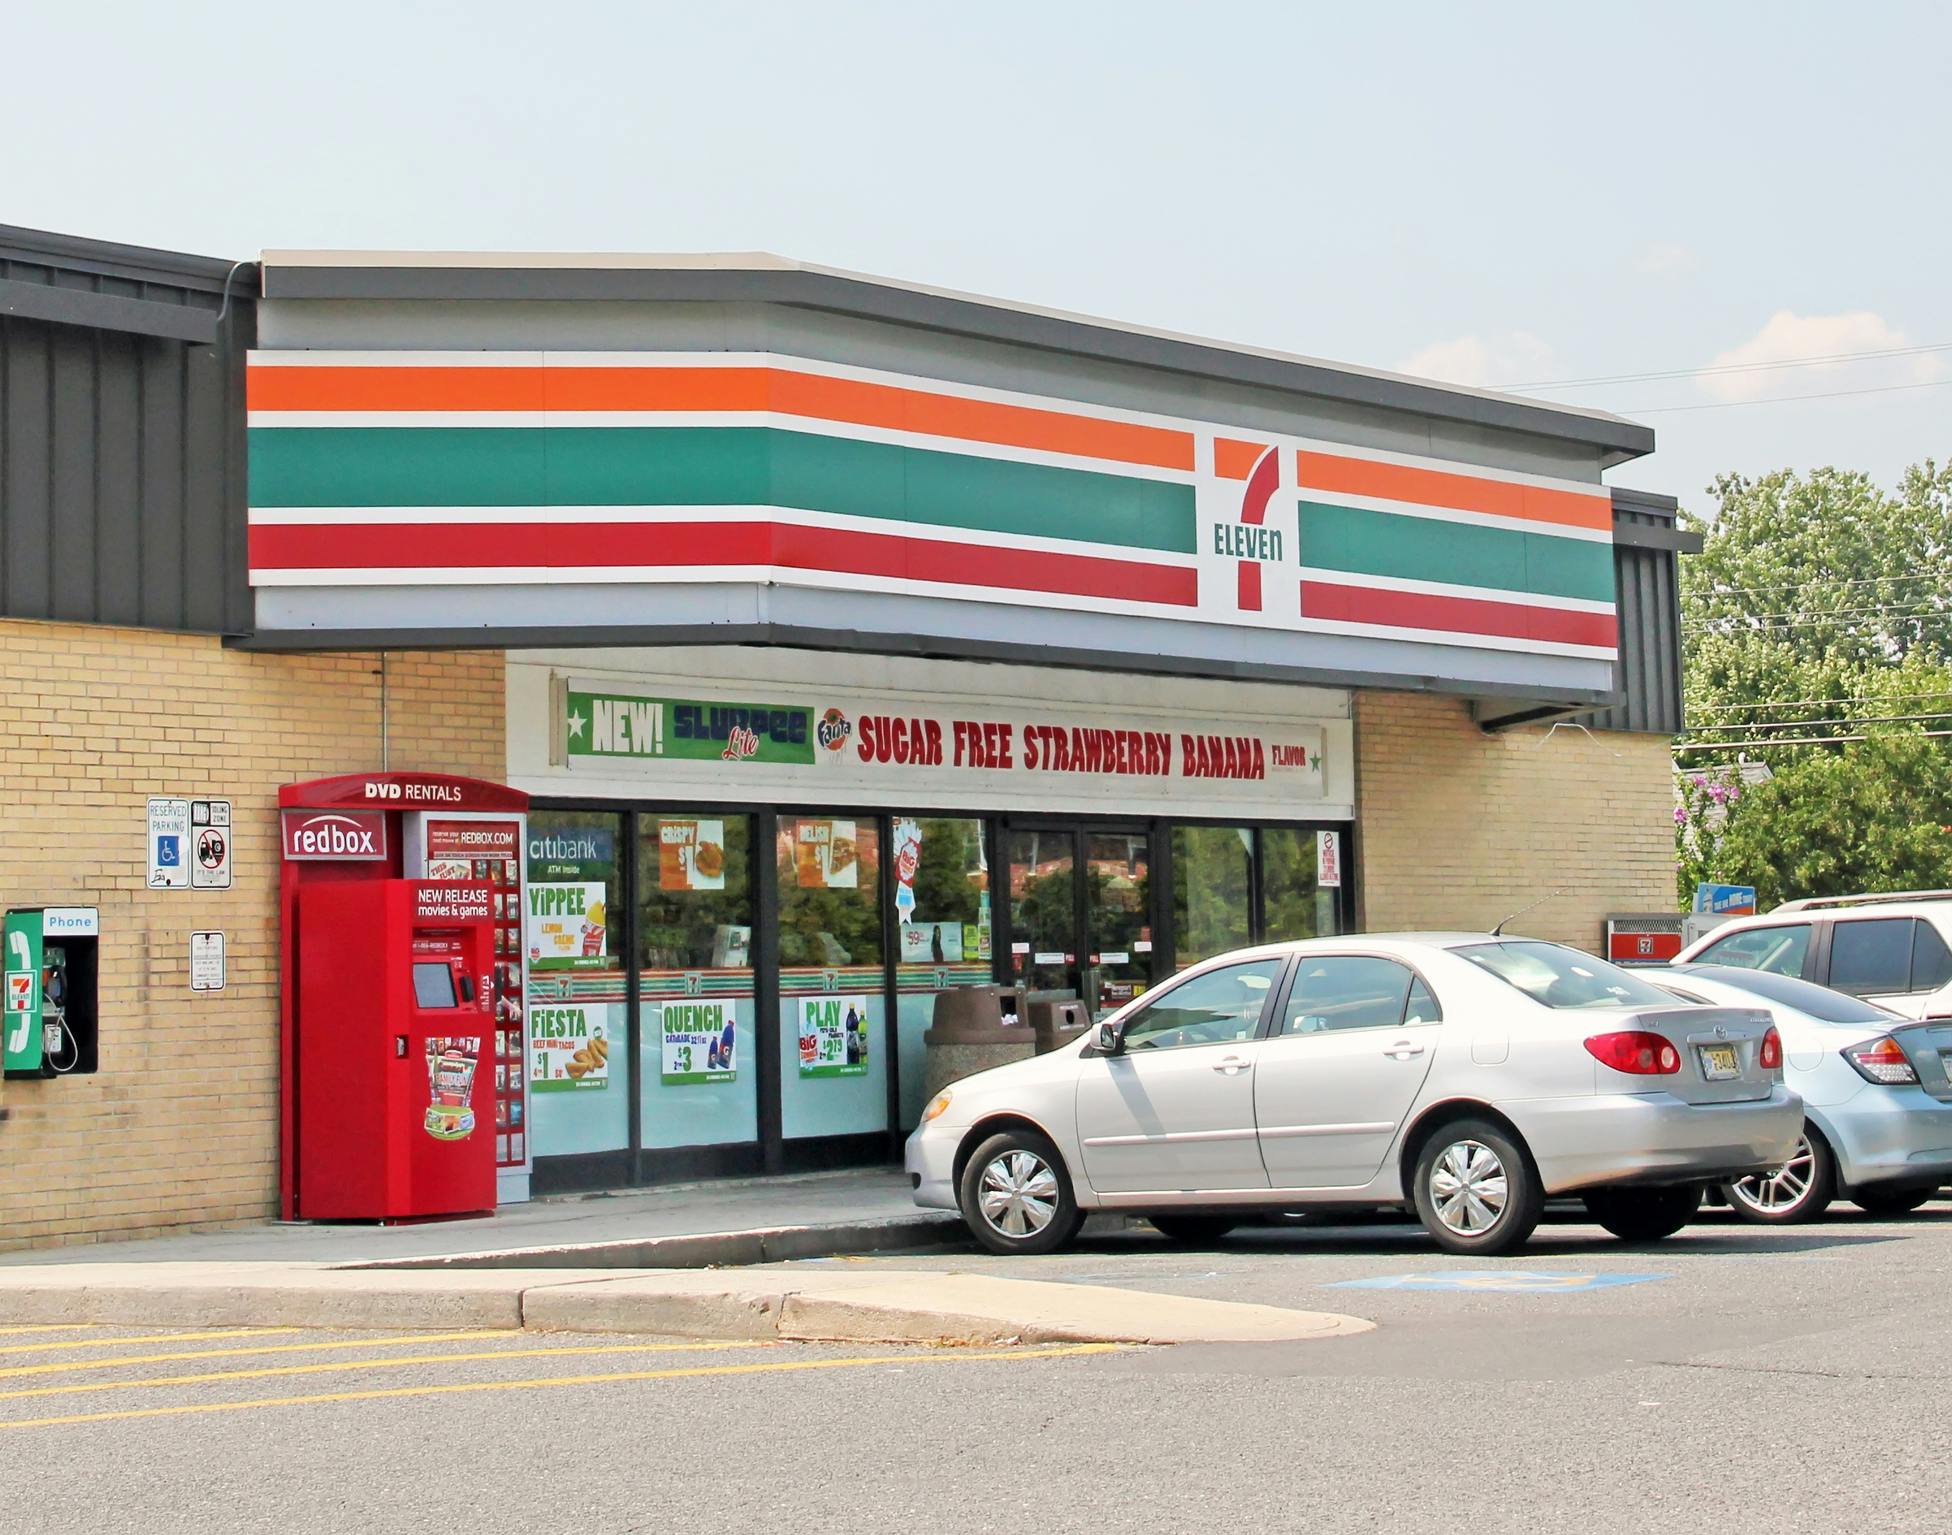 A 7-eleven storefront with cars parked in front.